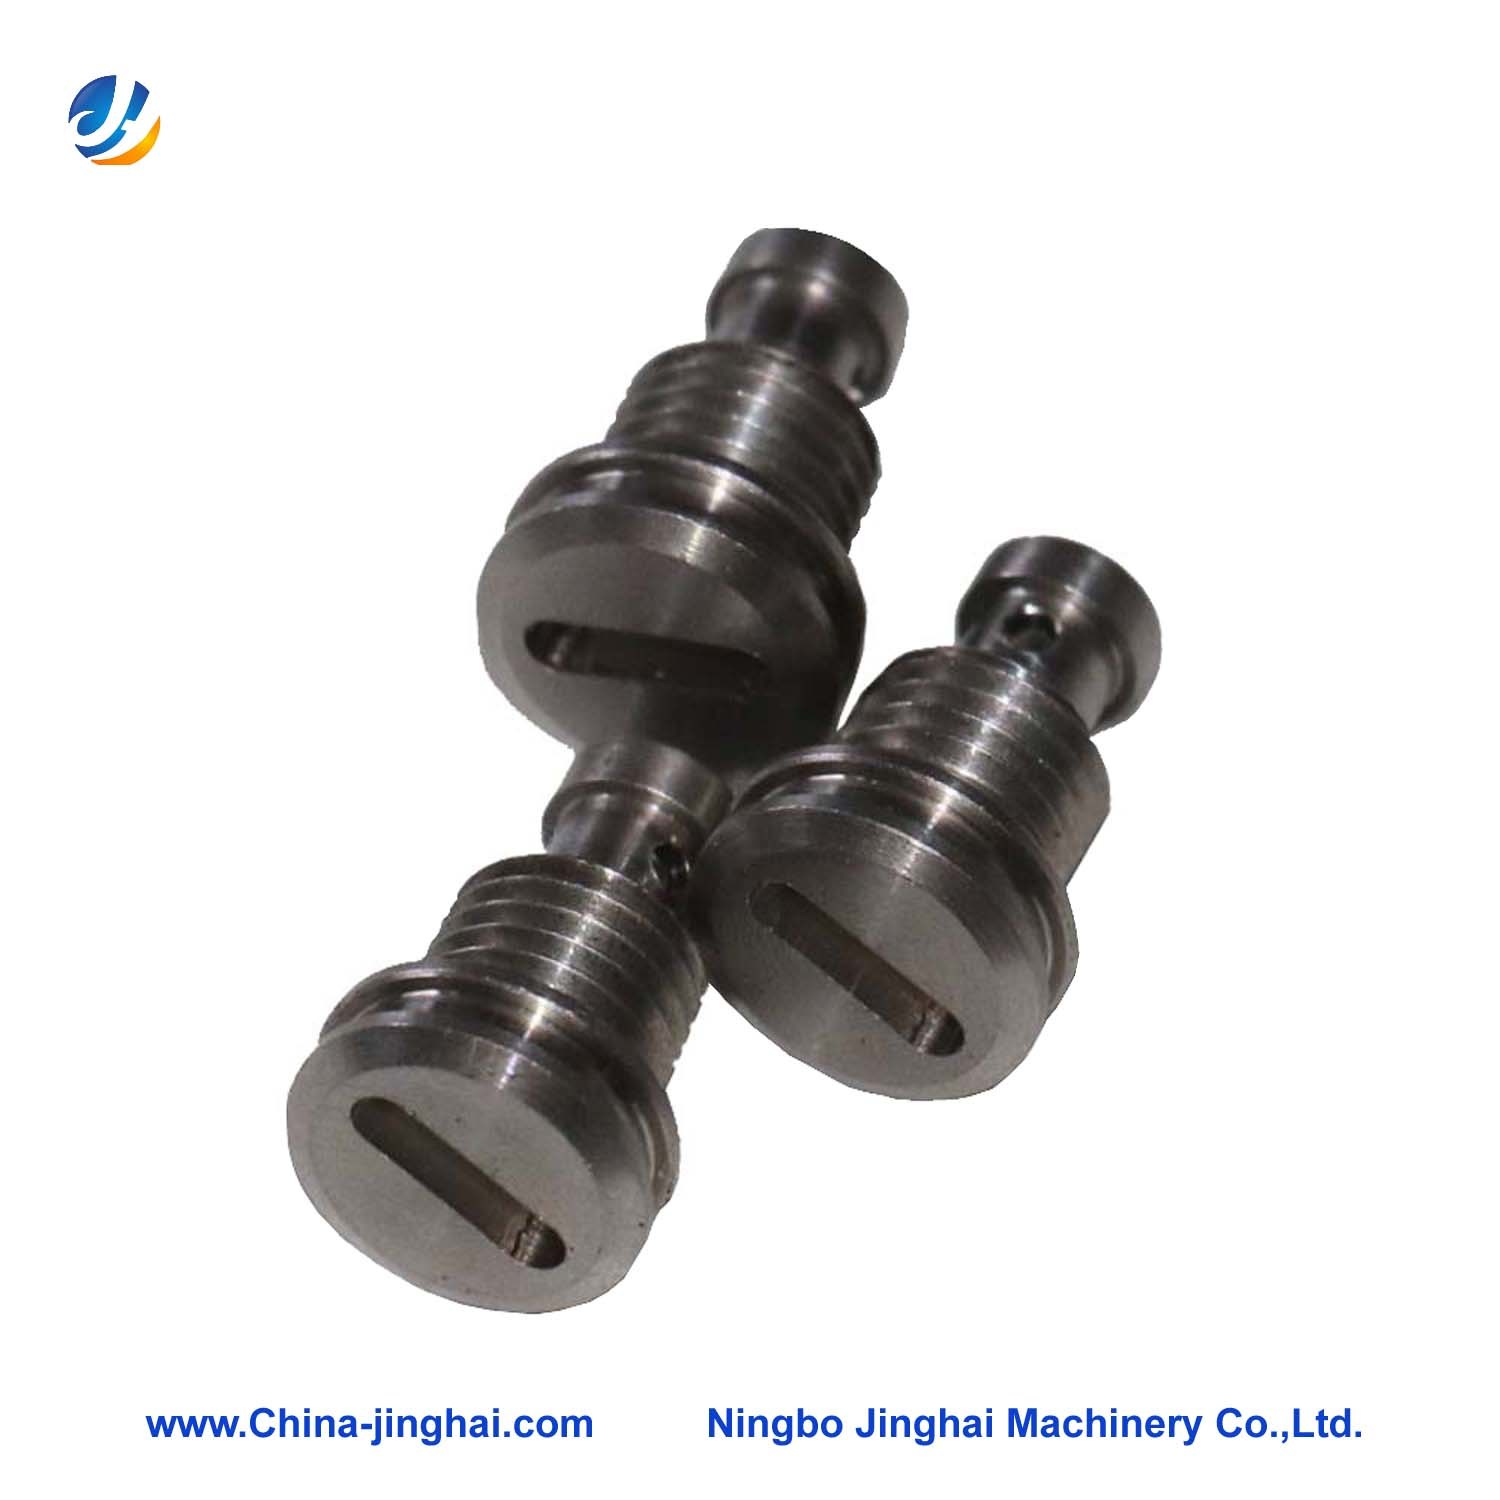 Customed Precision Non-Standard Stainless Steel Screw of Machinery